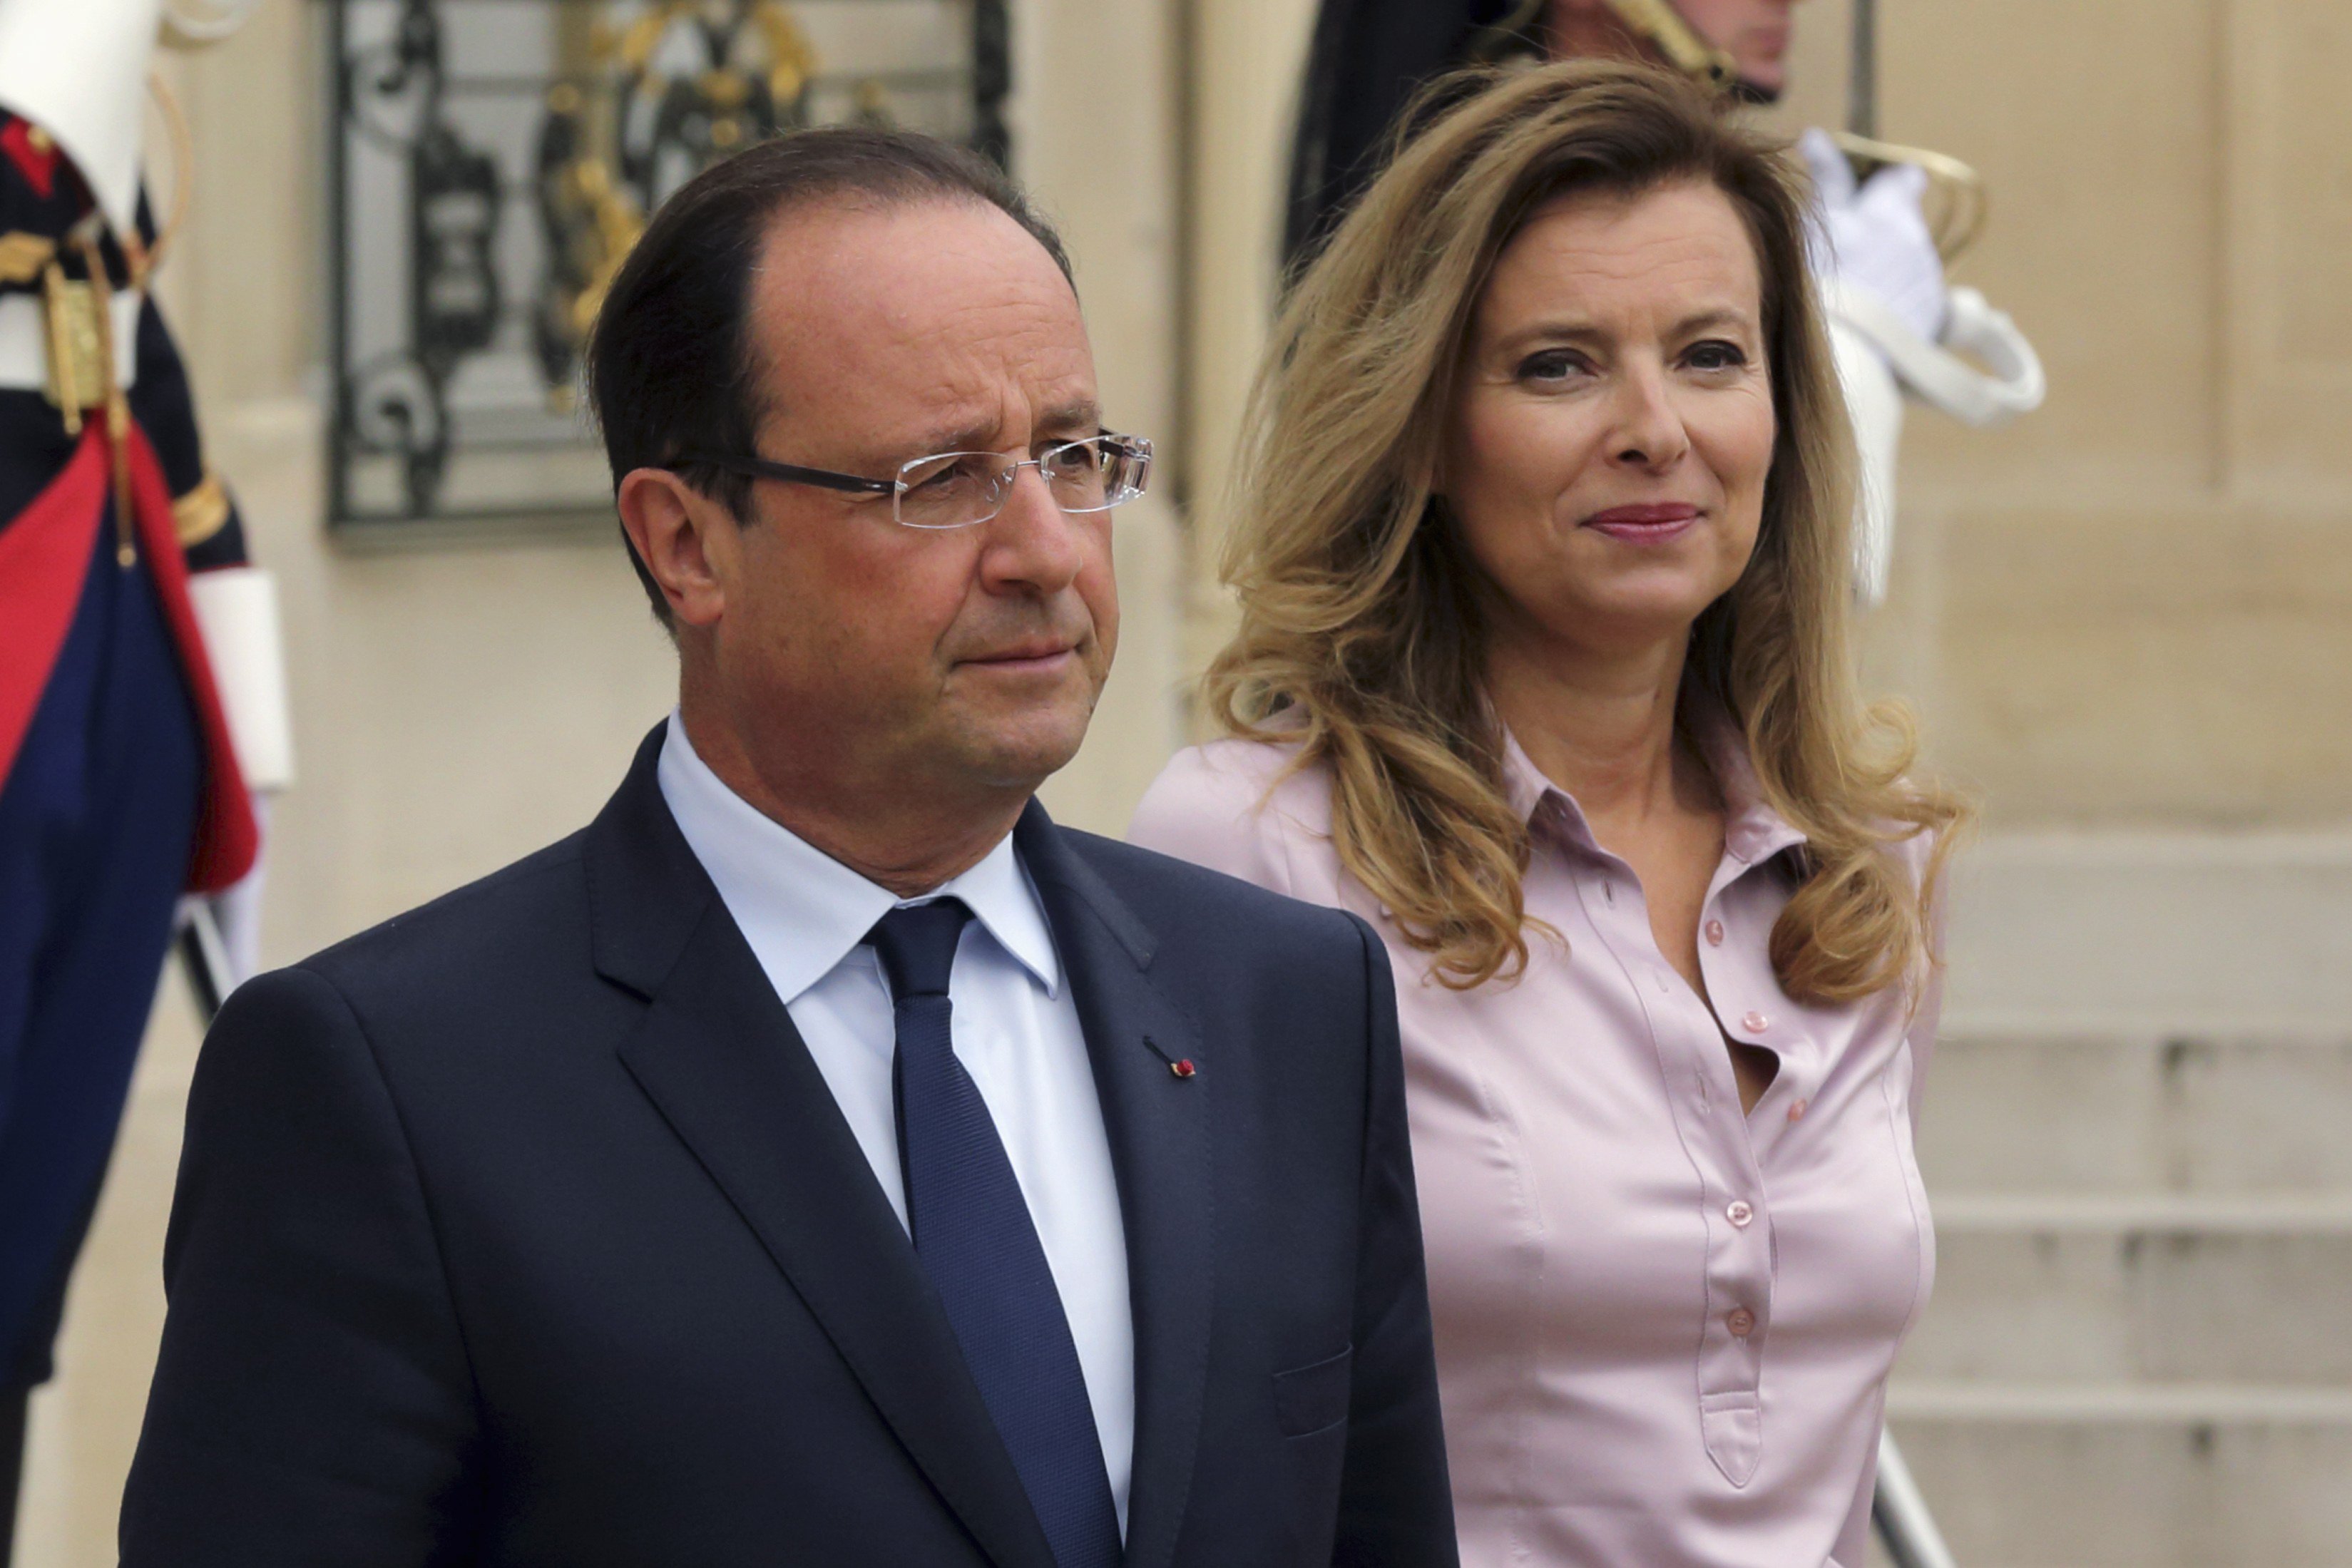 French President Hollande and first lady Valerie Trierweiler after a meeting at the Elysee Palace in Paris